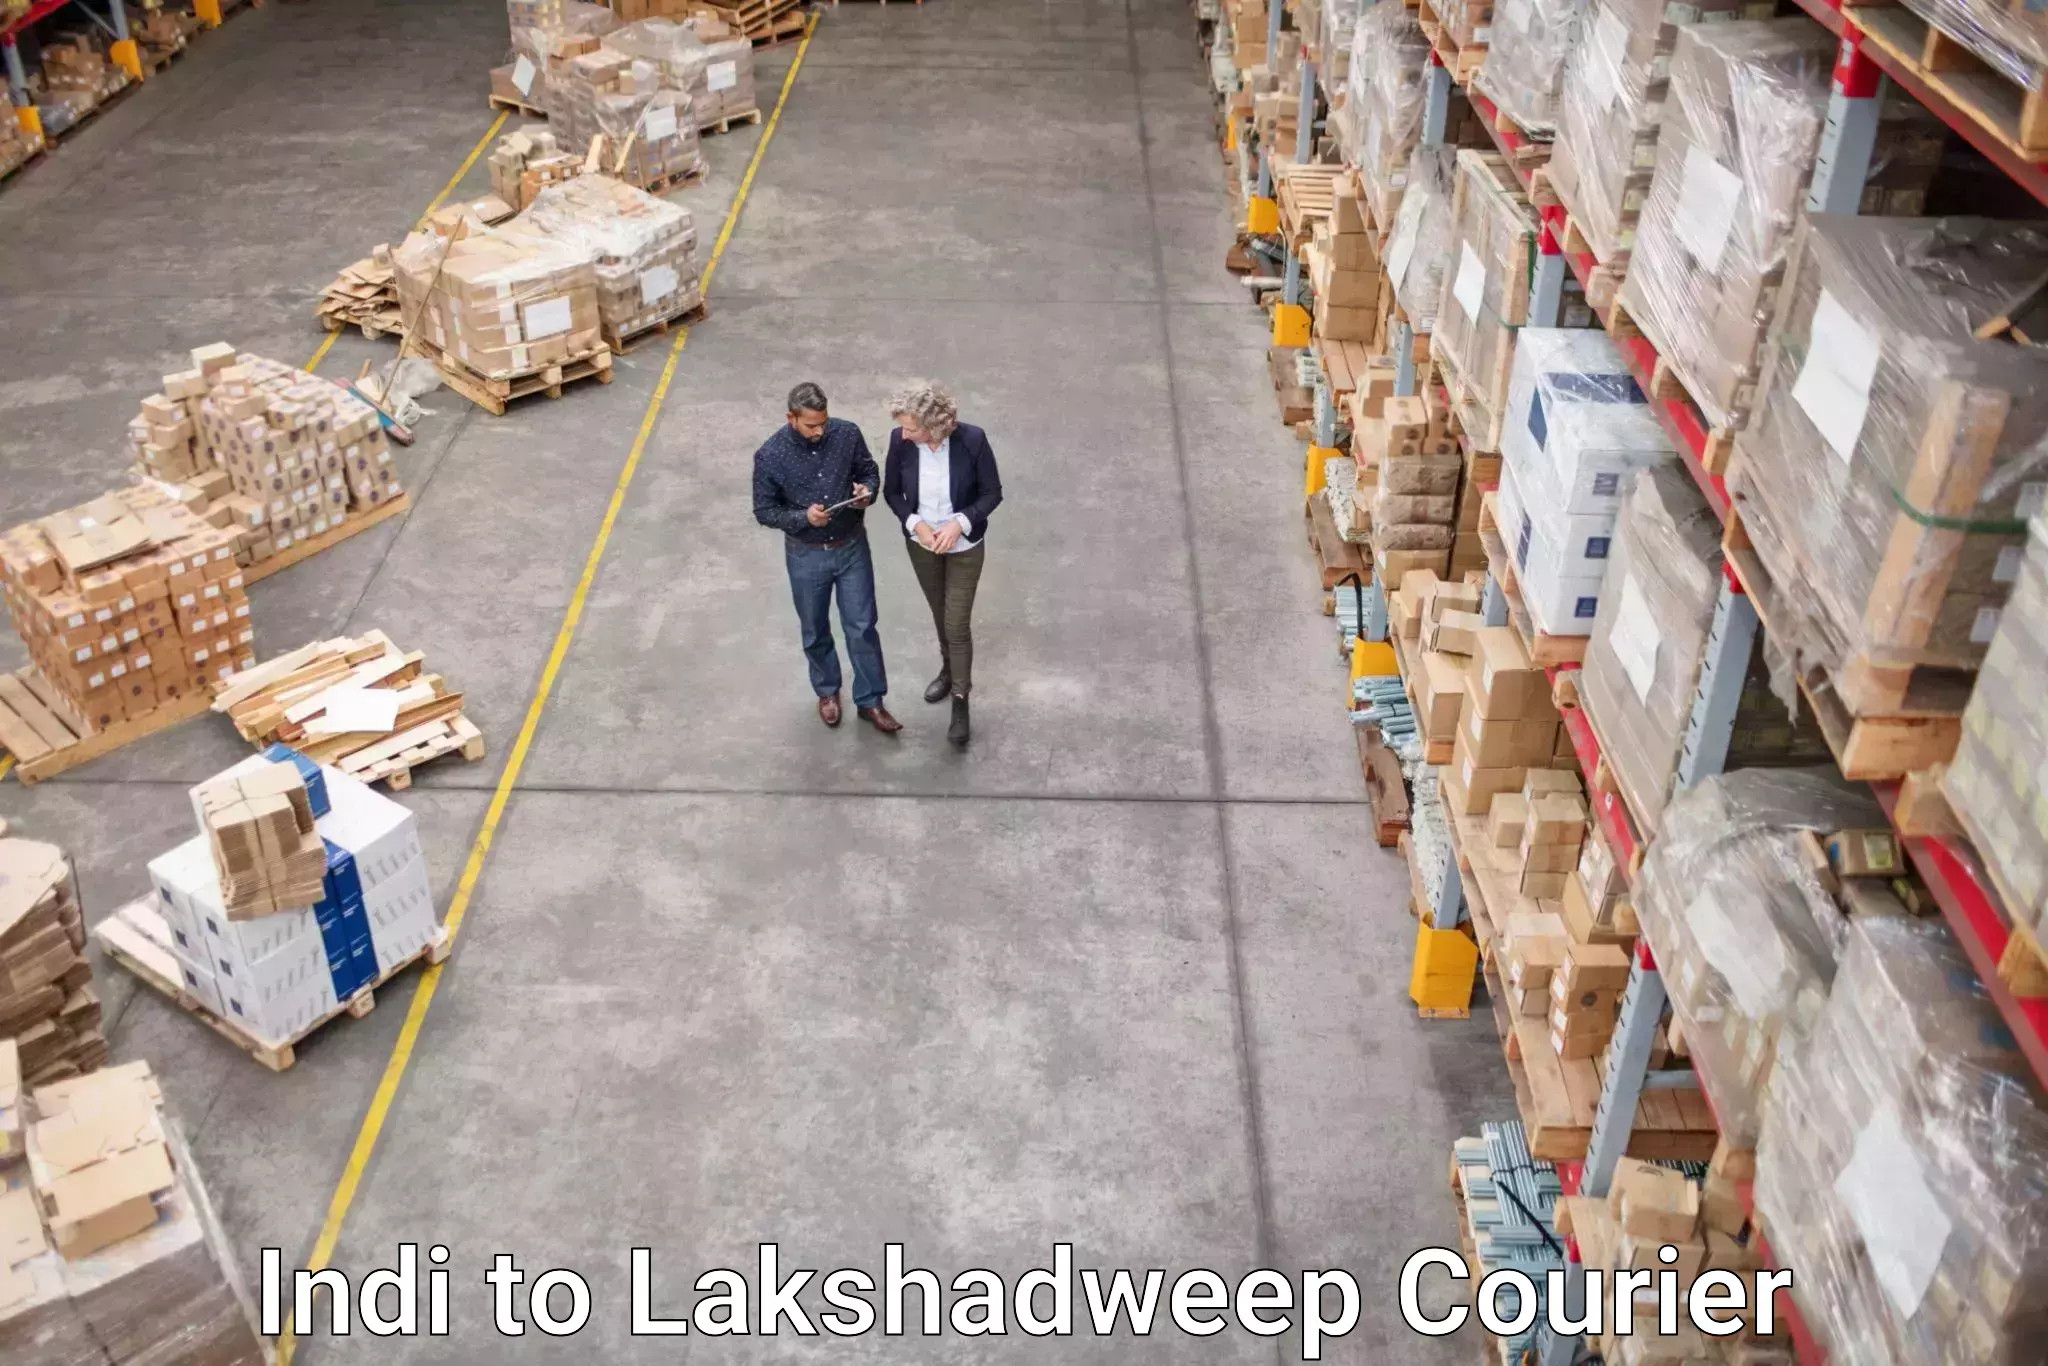 Global courier networks Indi to Lakshadweep